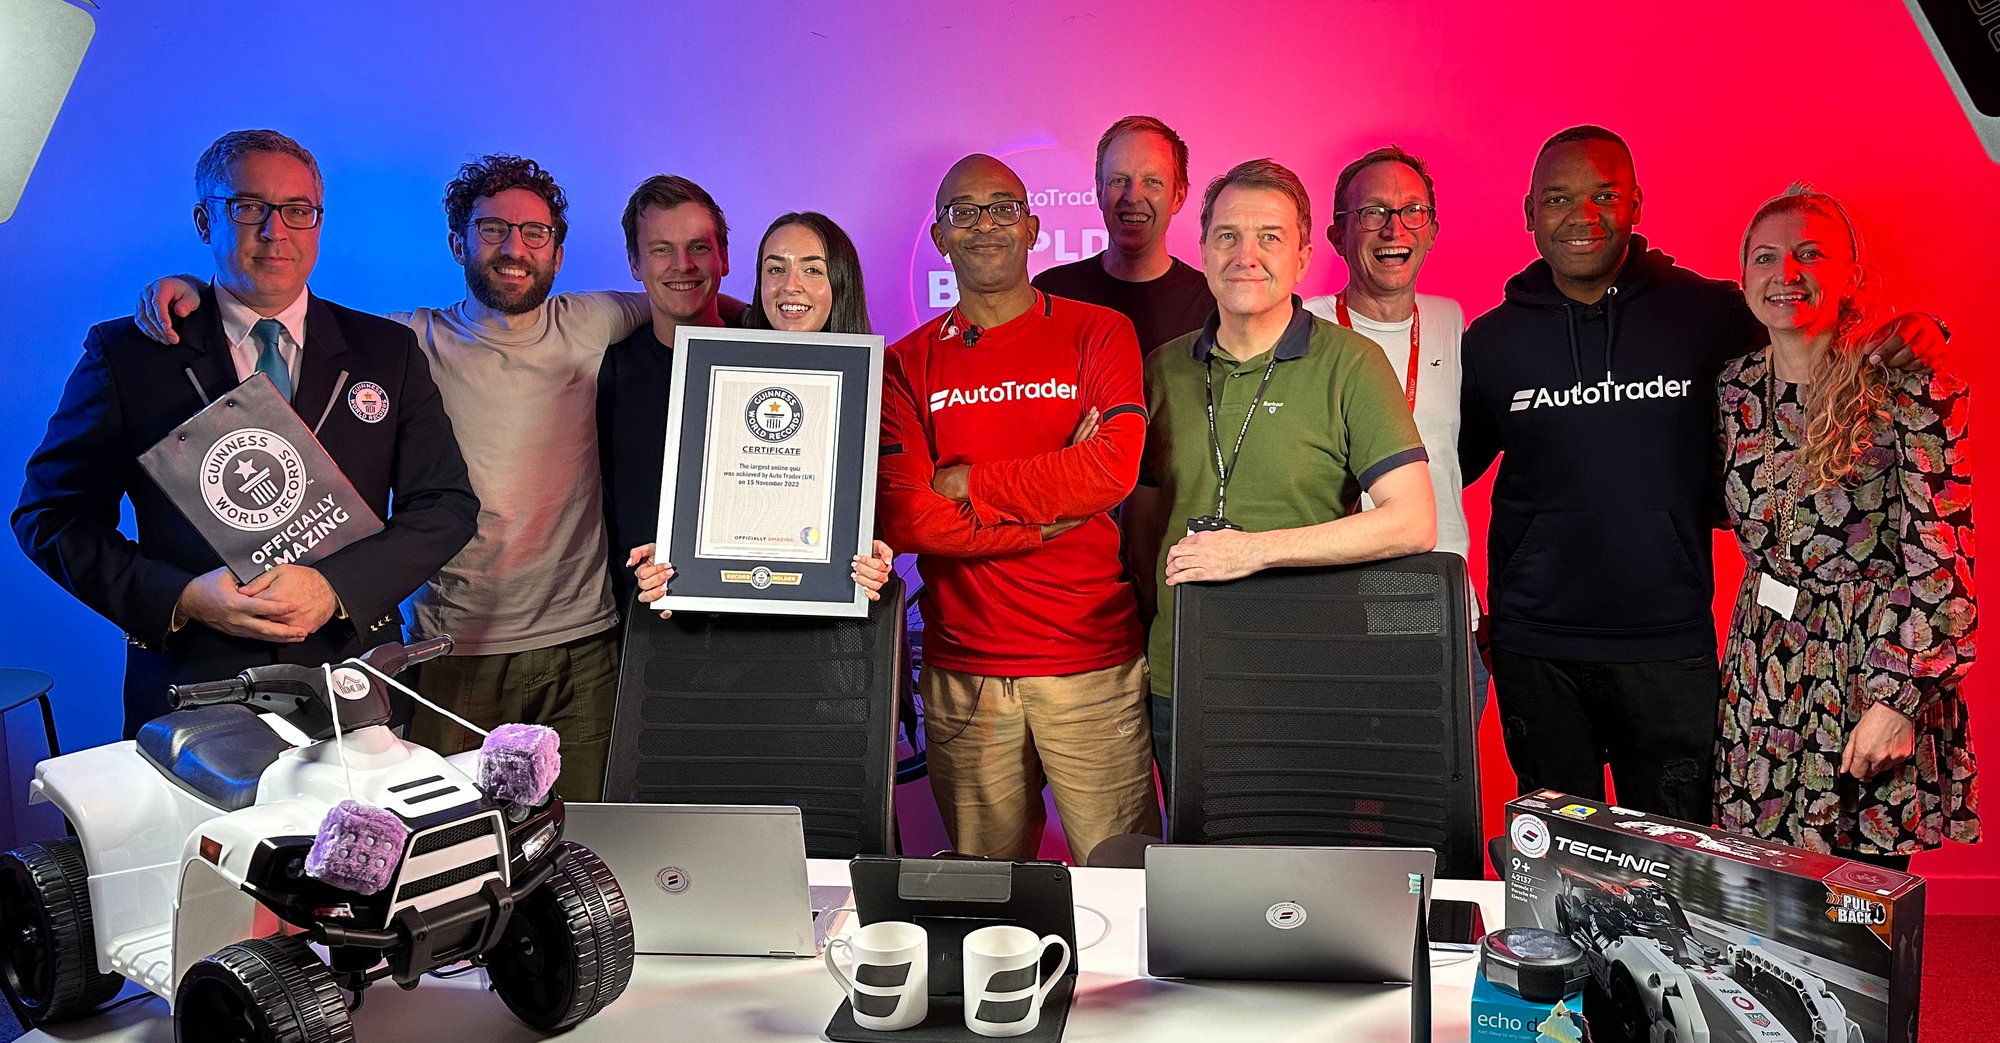 Piing and Auto Trader celebrate Guinness World Record win